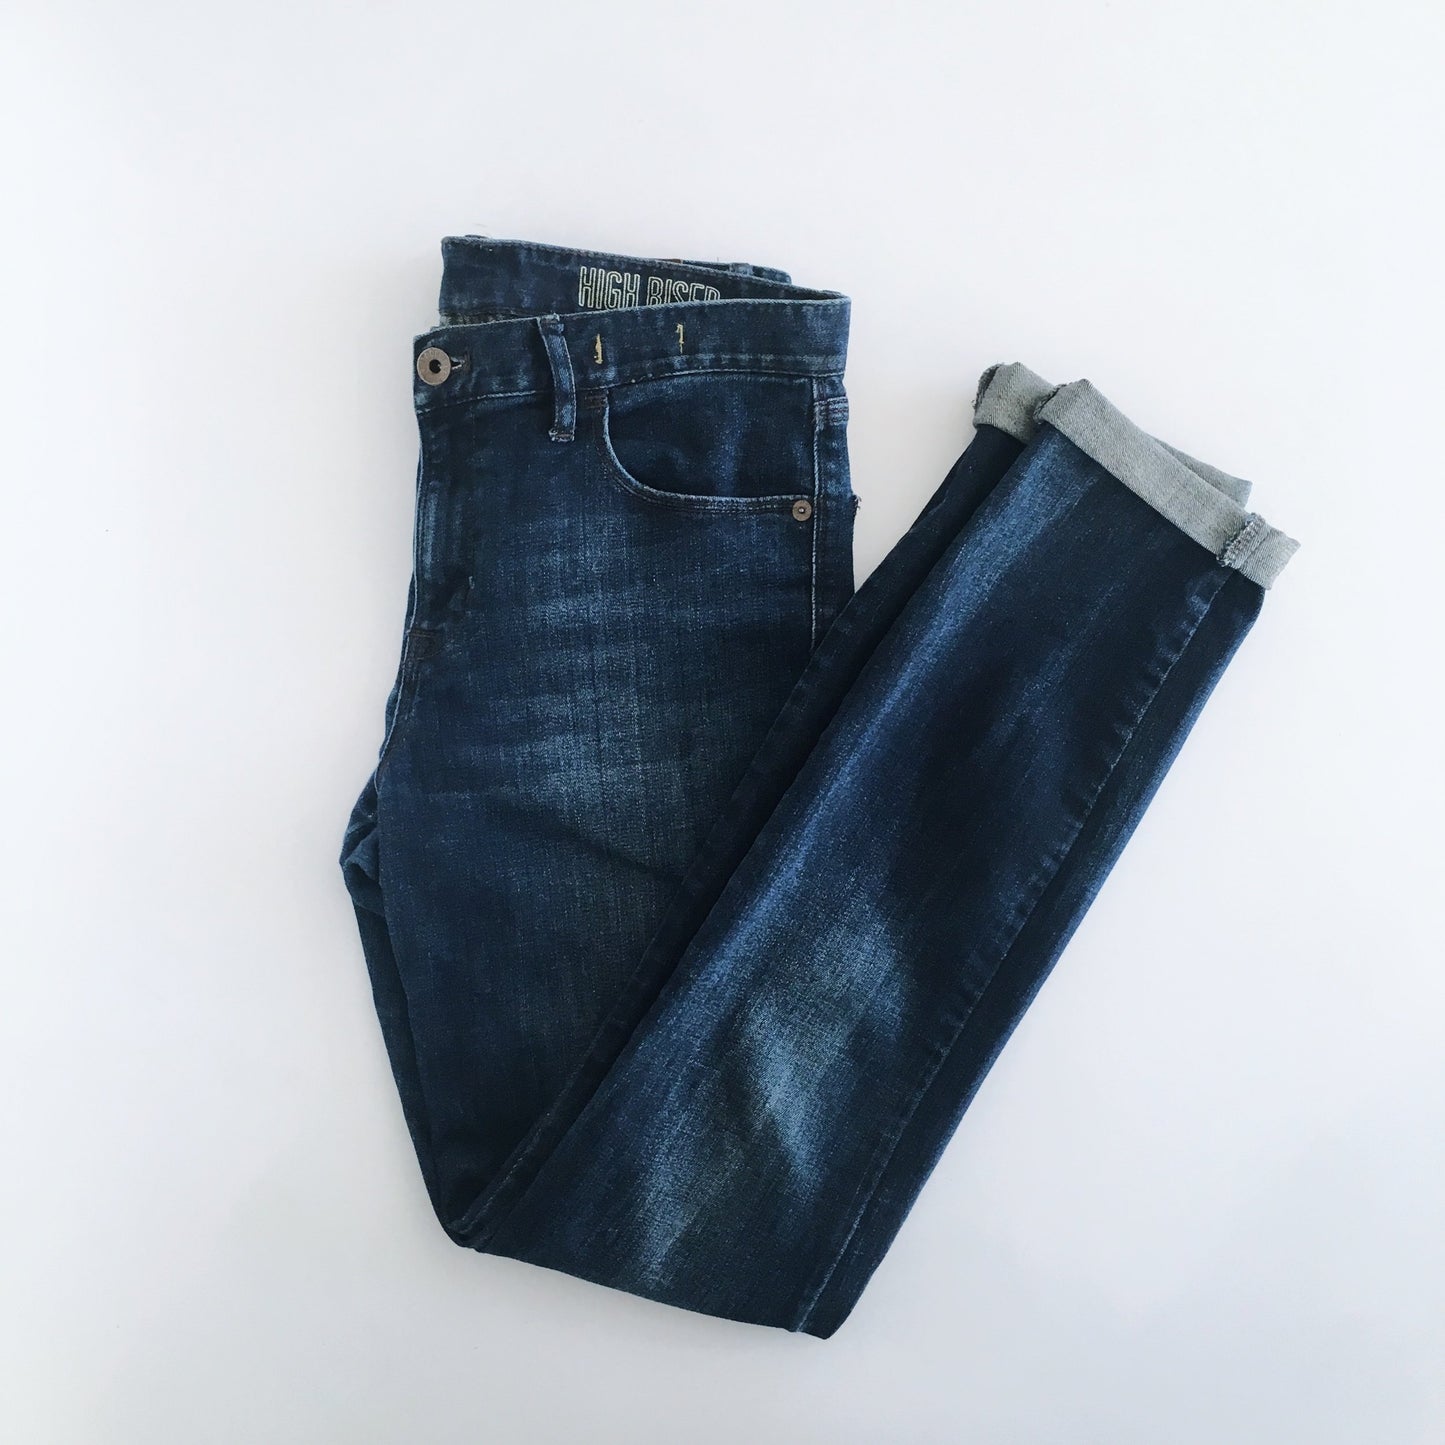 Madewell High Riser Skinny Jeans - size 27